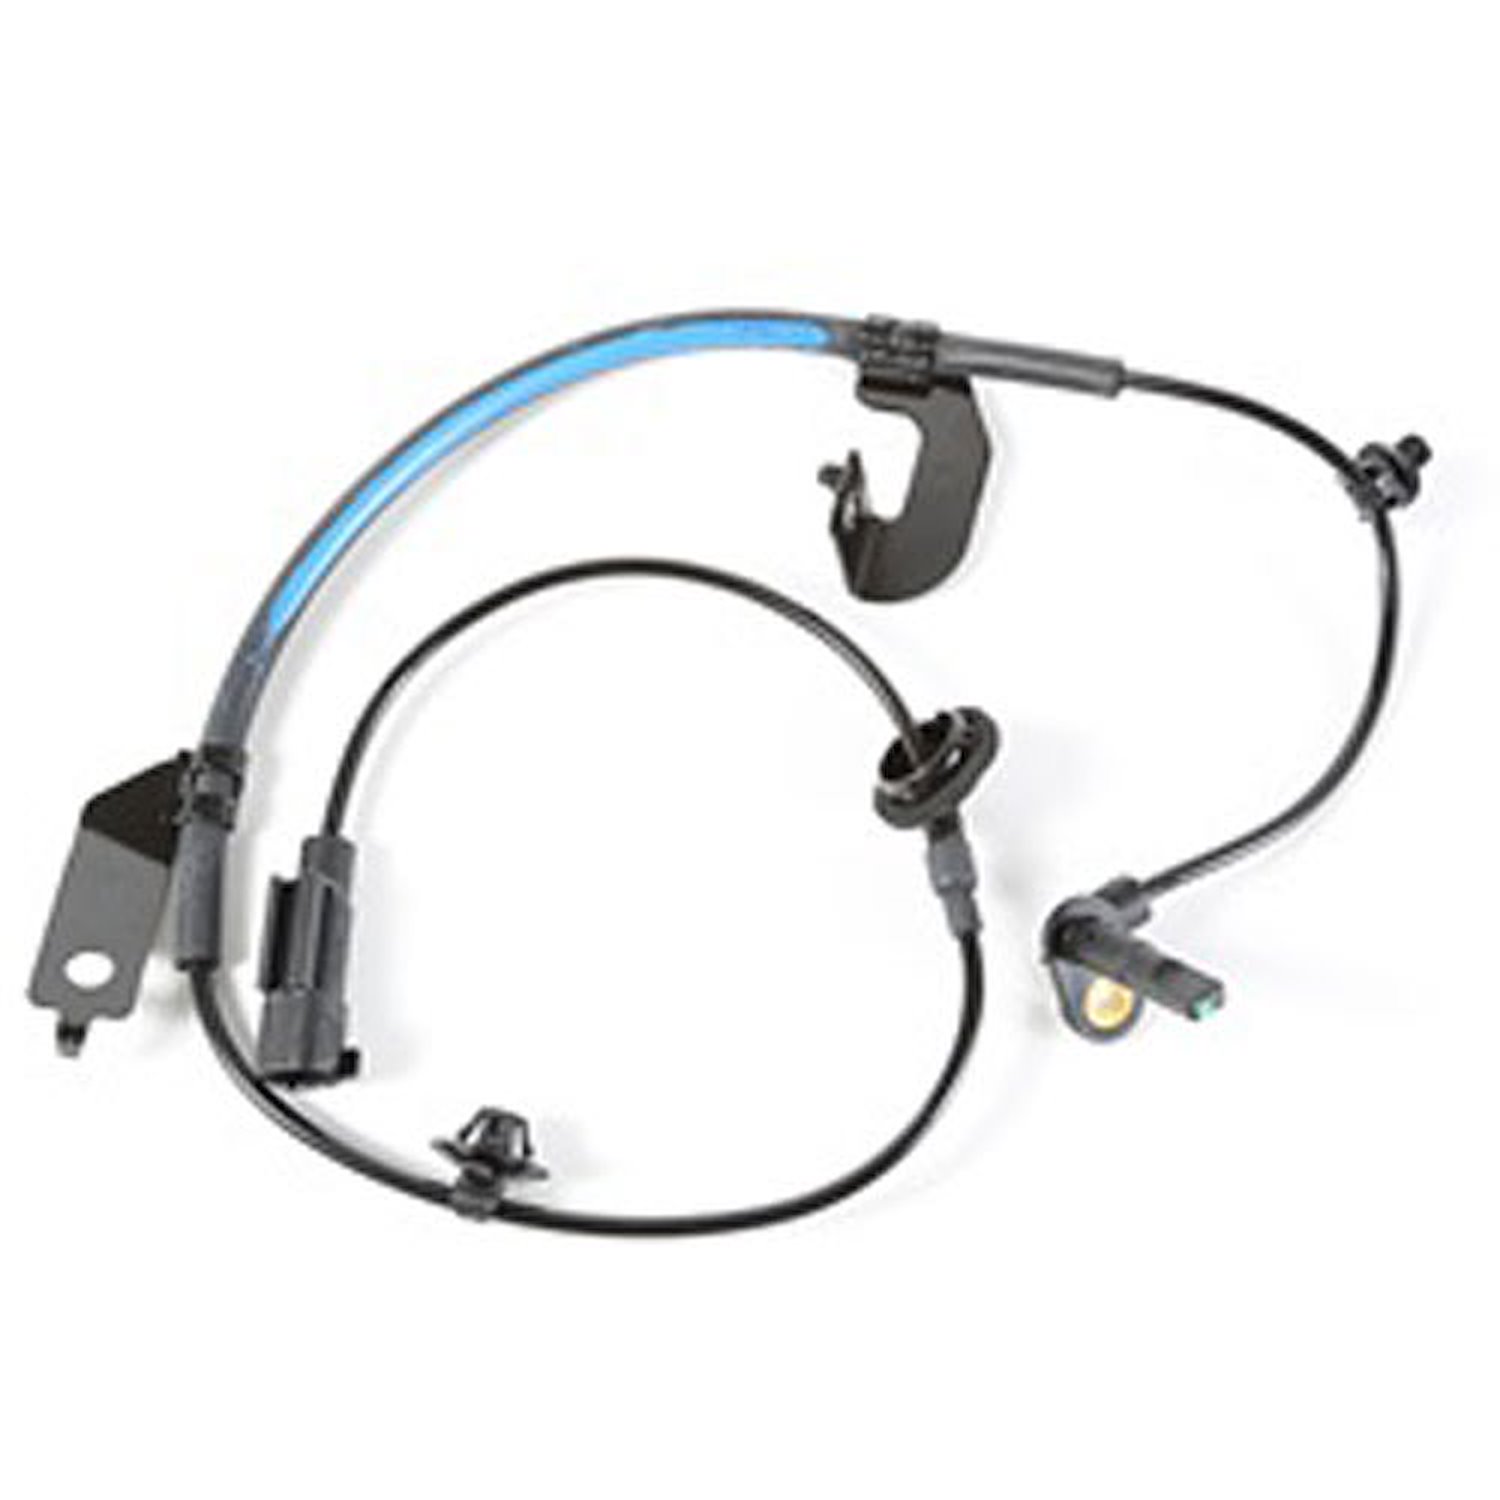 This front right wheel speed sensor from Omix-ADA